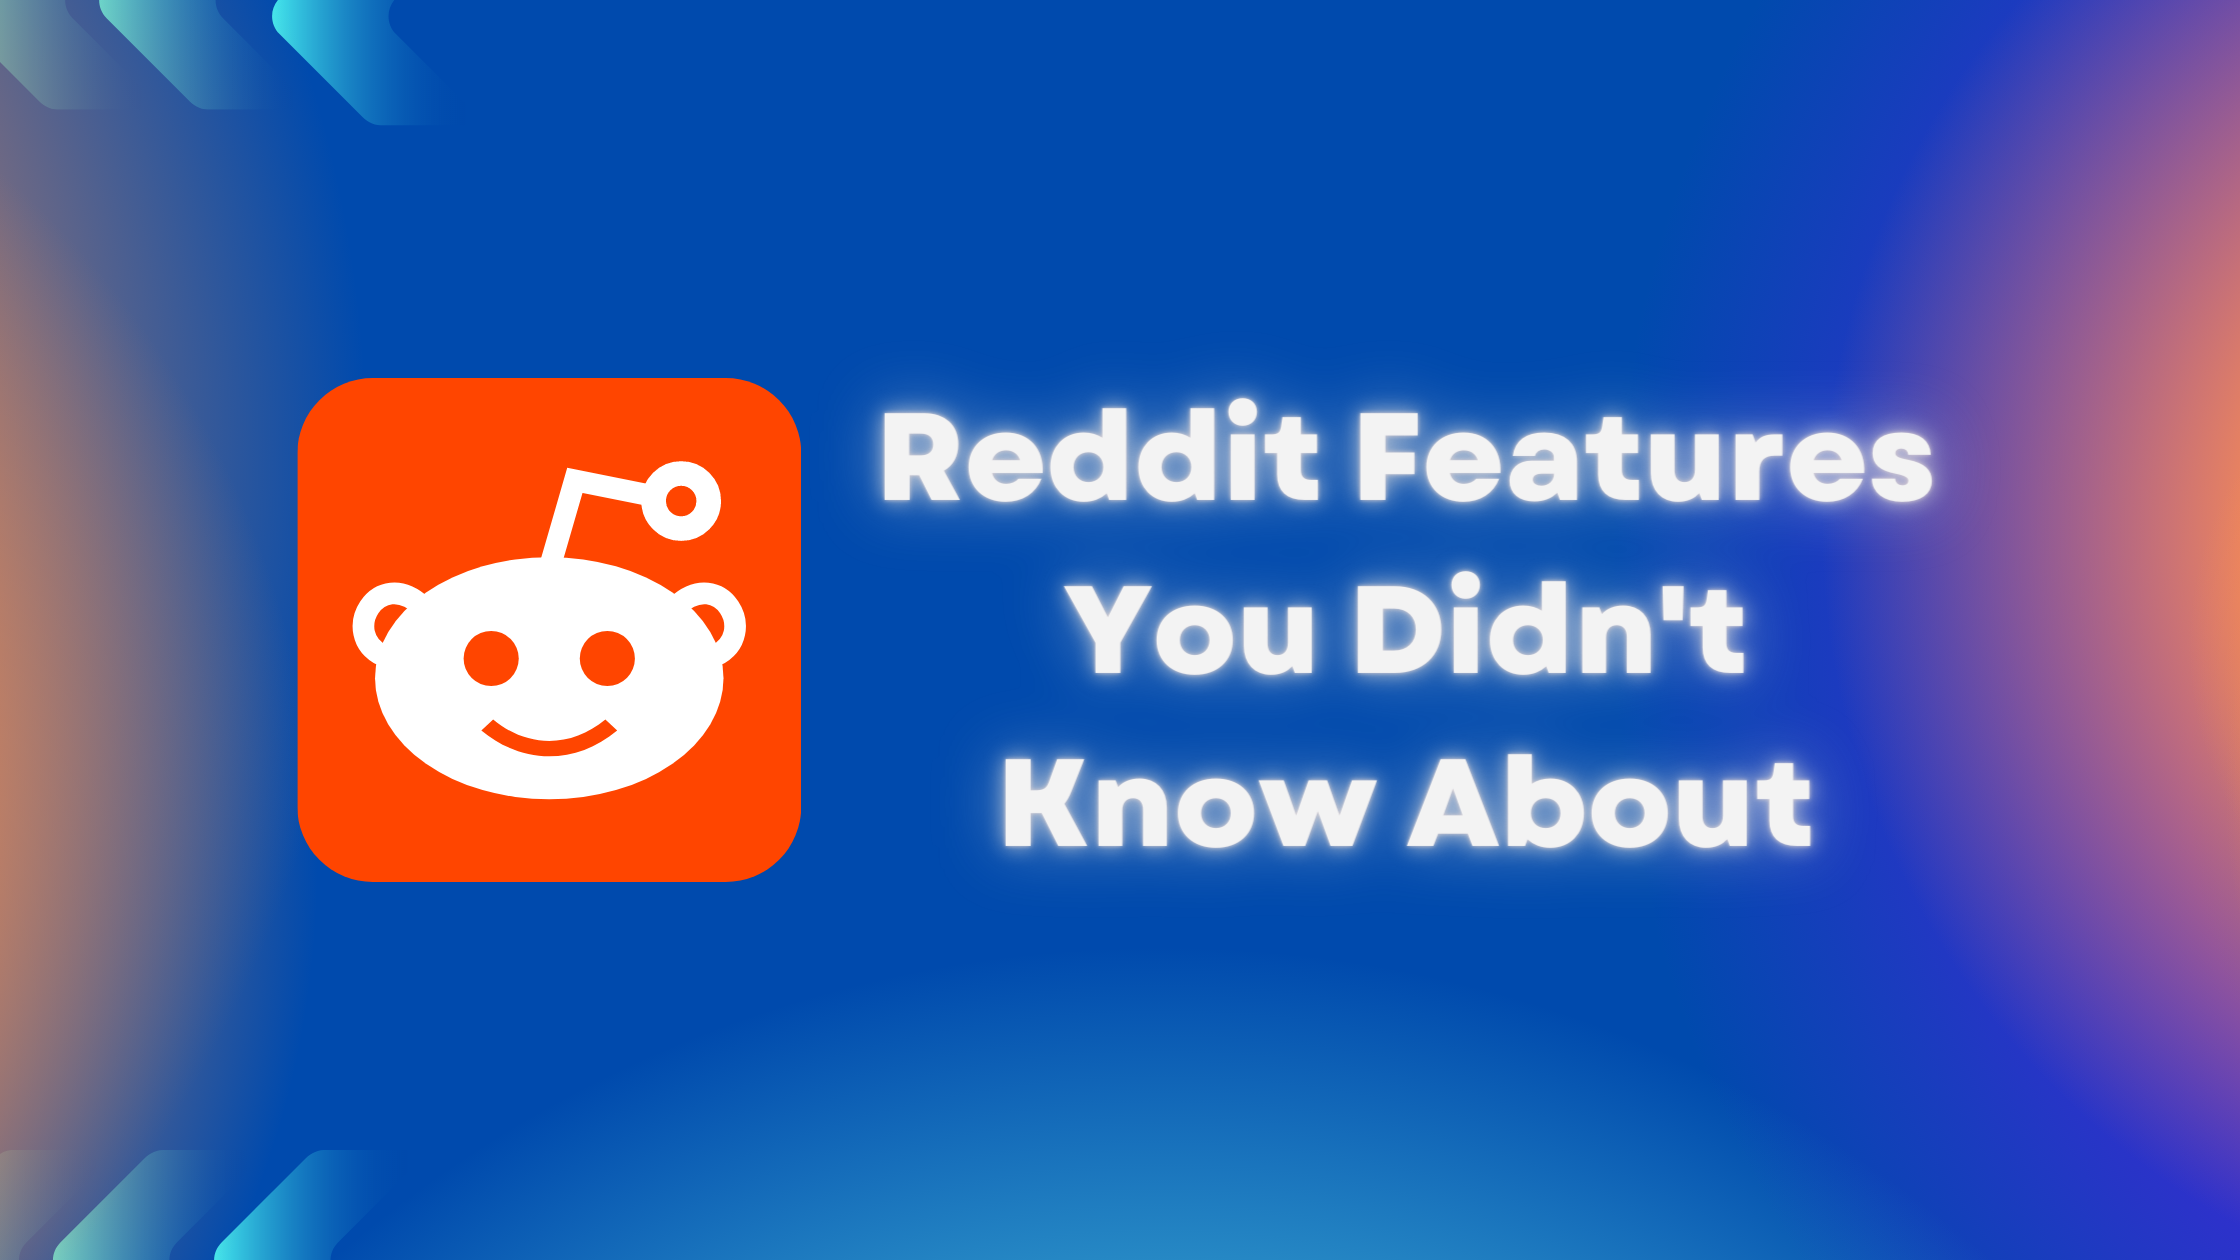 Reddit Features You Didn't Know About